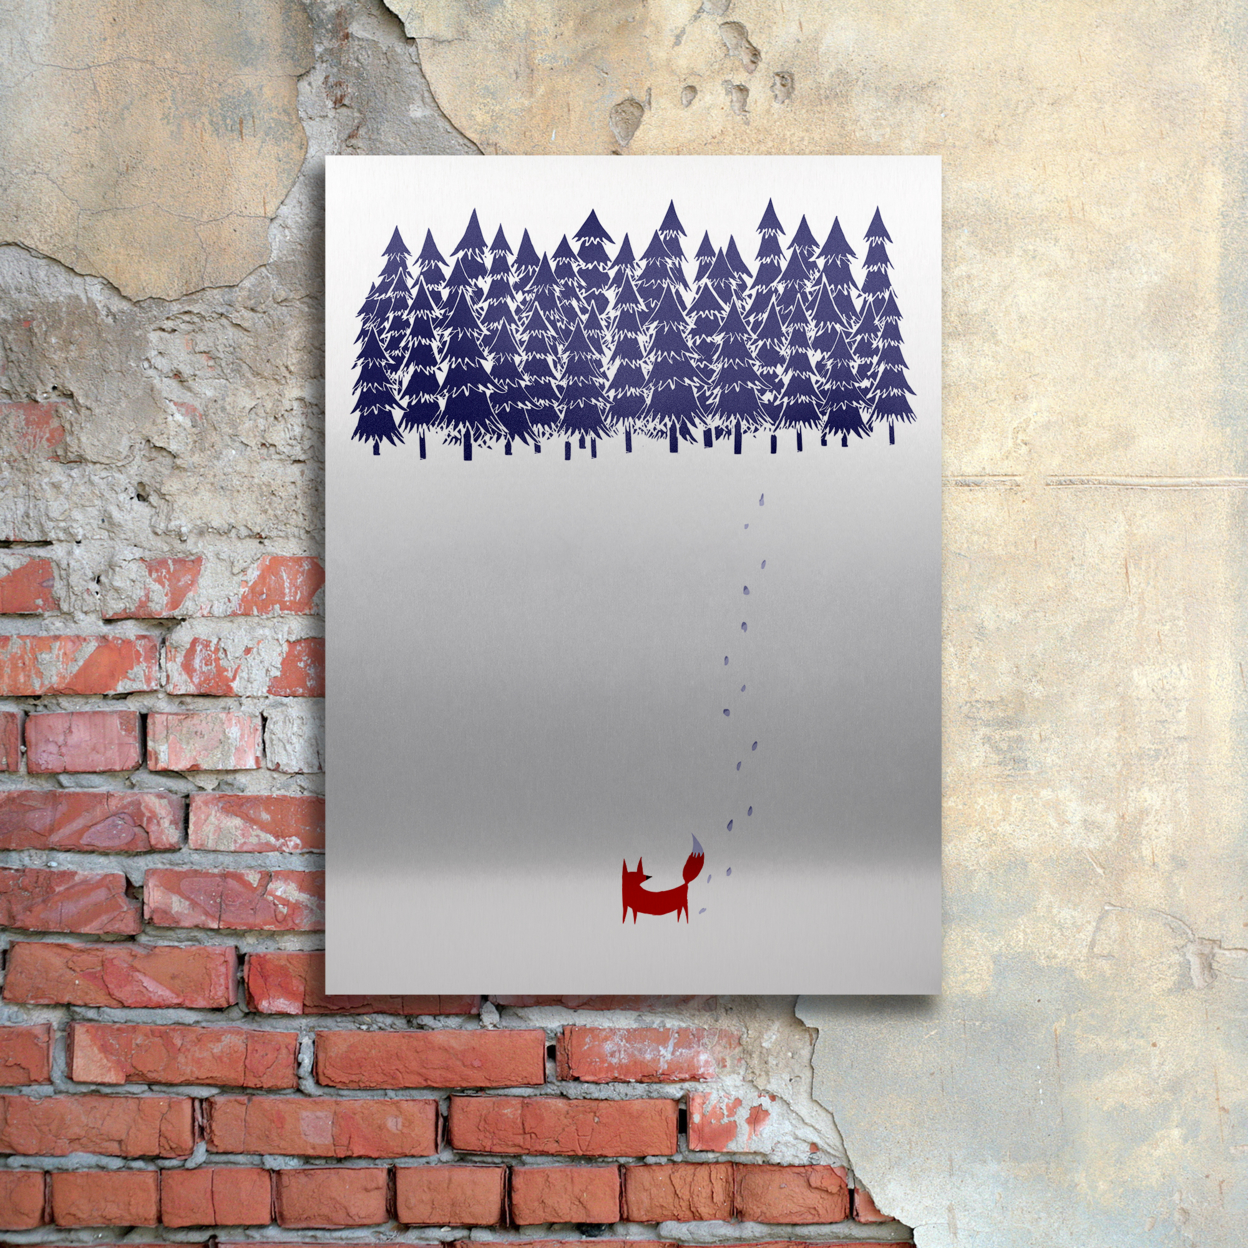 Robert Farkas 'Alone In The Forest' Floating Brushed Aluminum Art 16 X 22